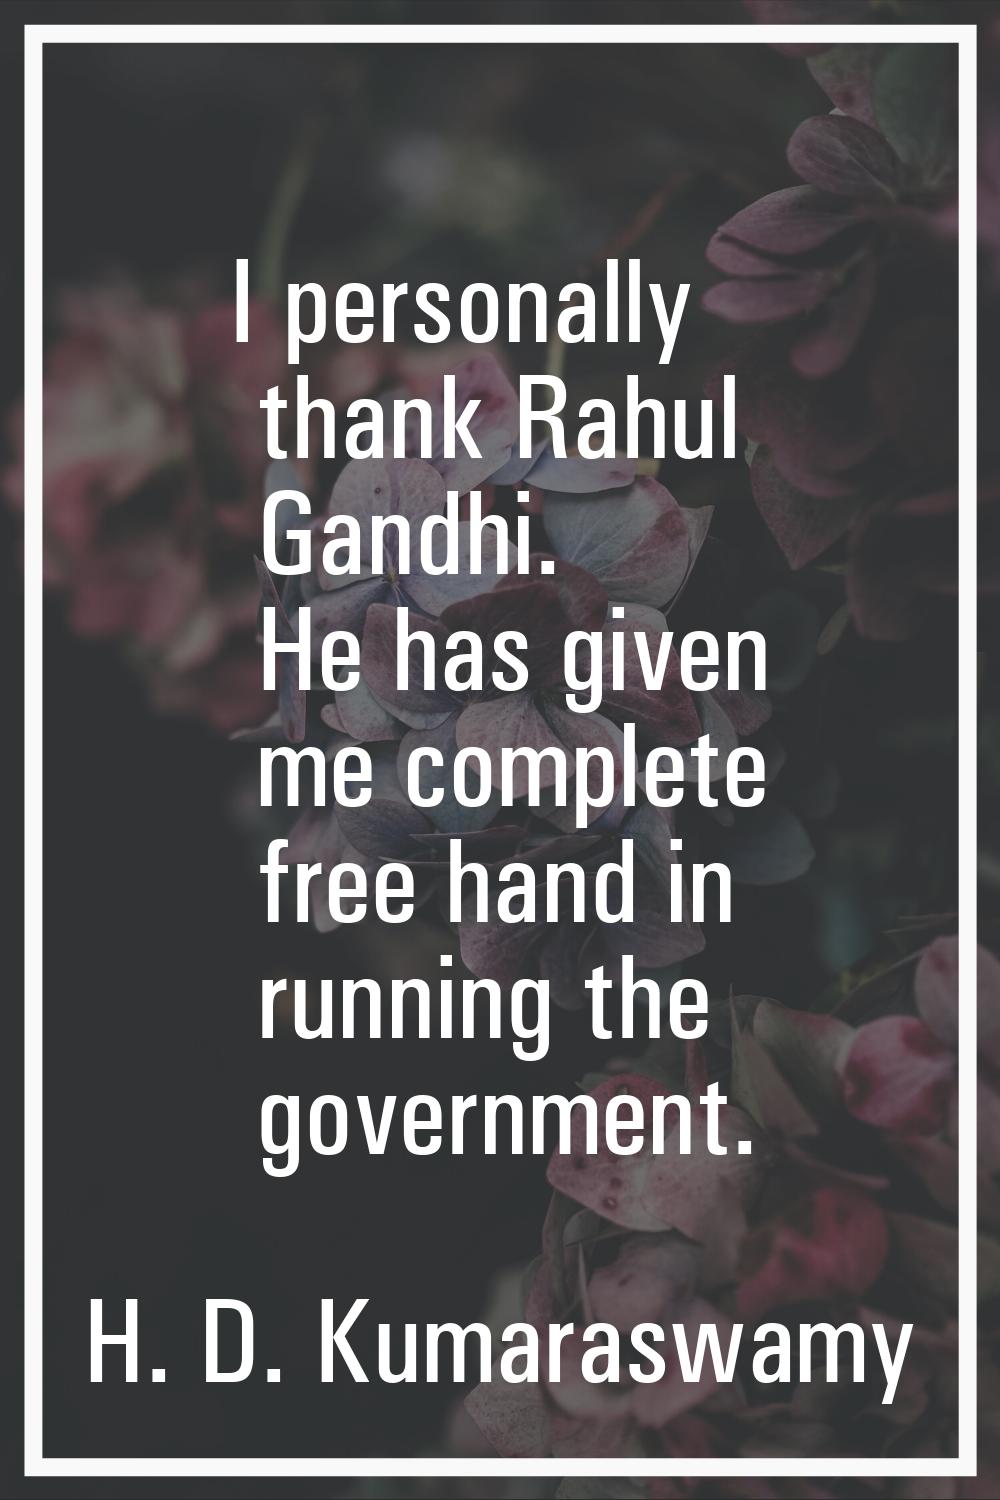 I personally thank Rahul Gandhi. He has given me complete free hand in running the government.